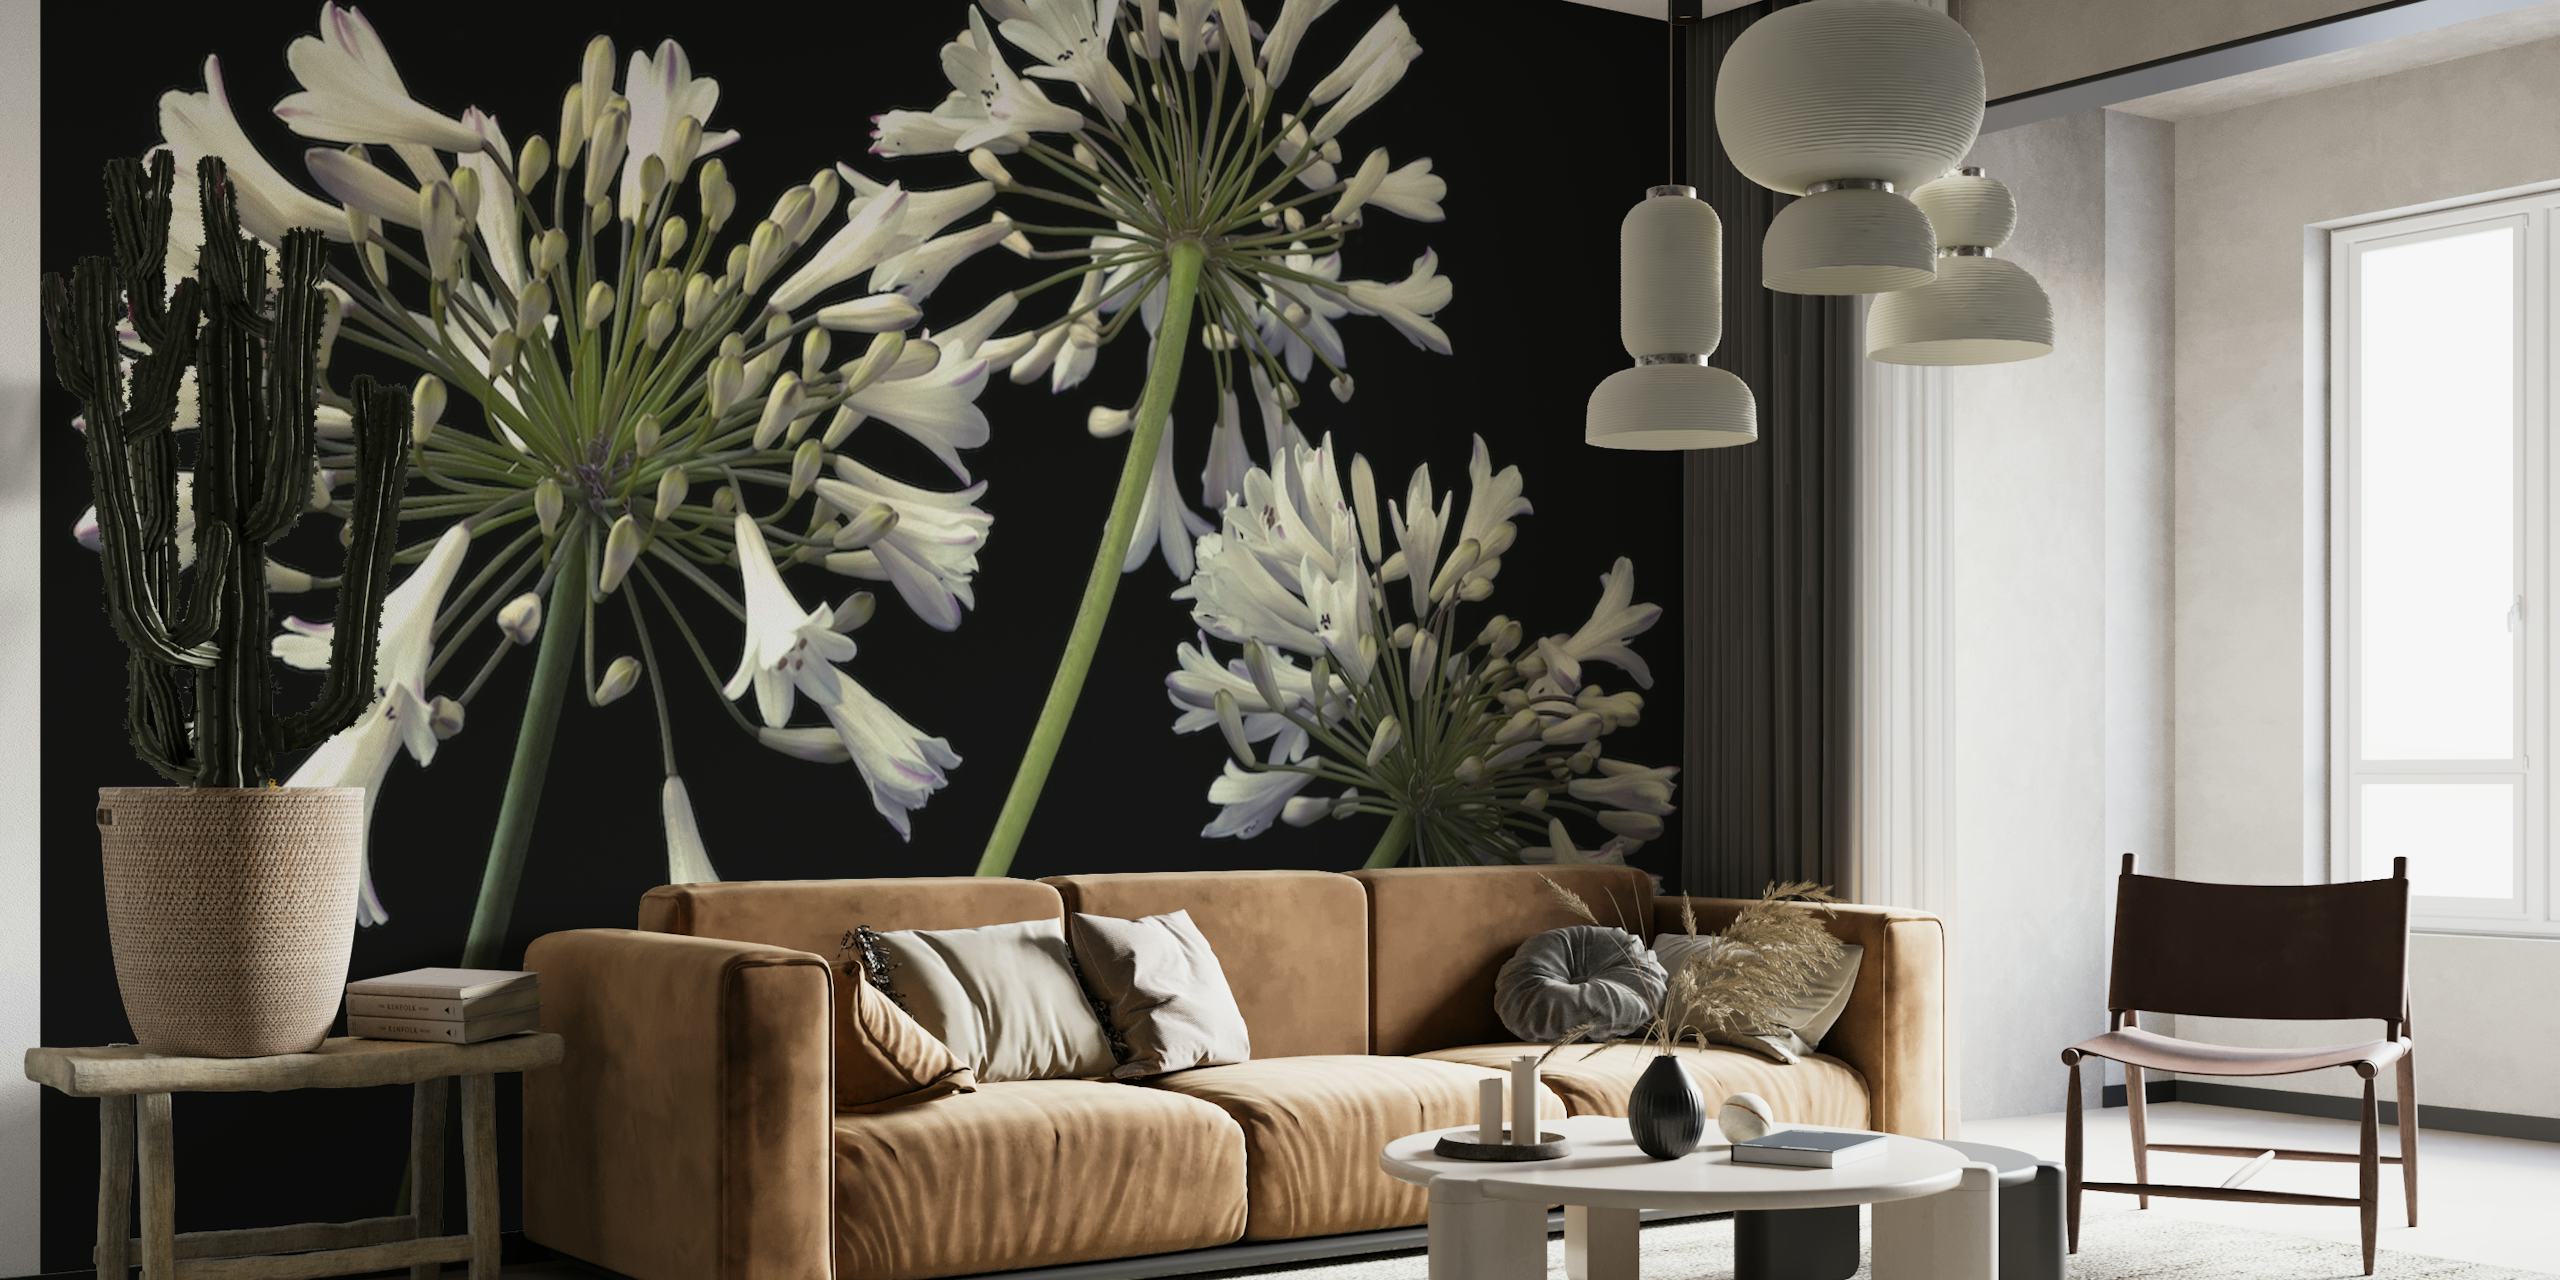 African Lily wall mural showing white Agapanthus flowers on a black background